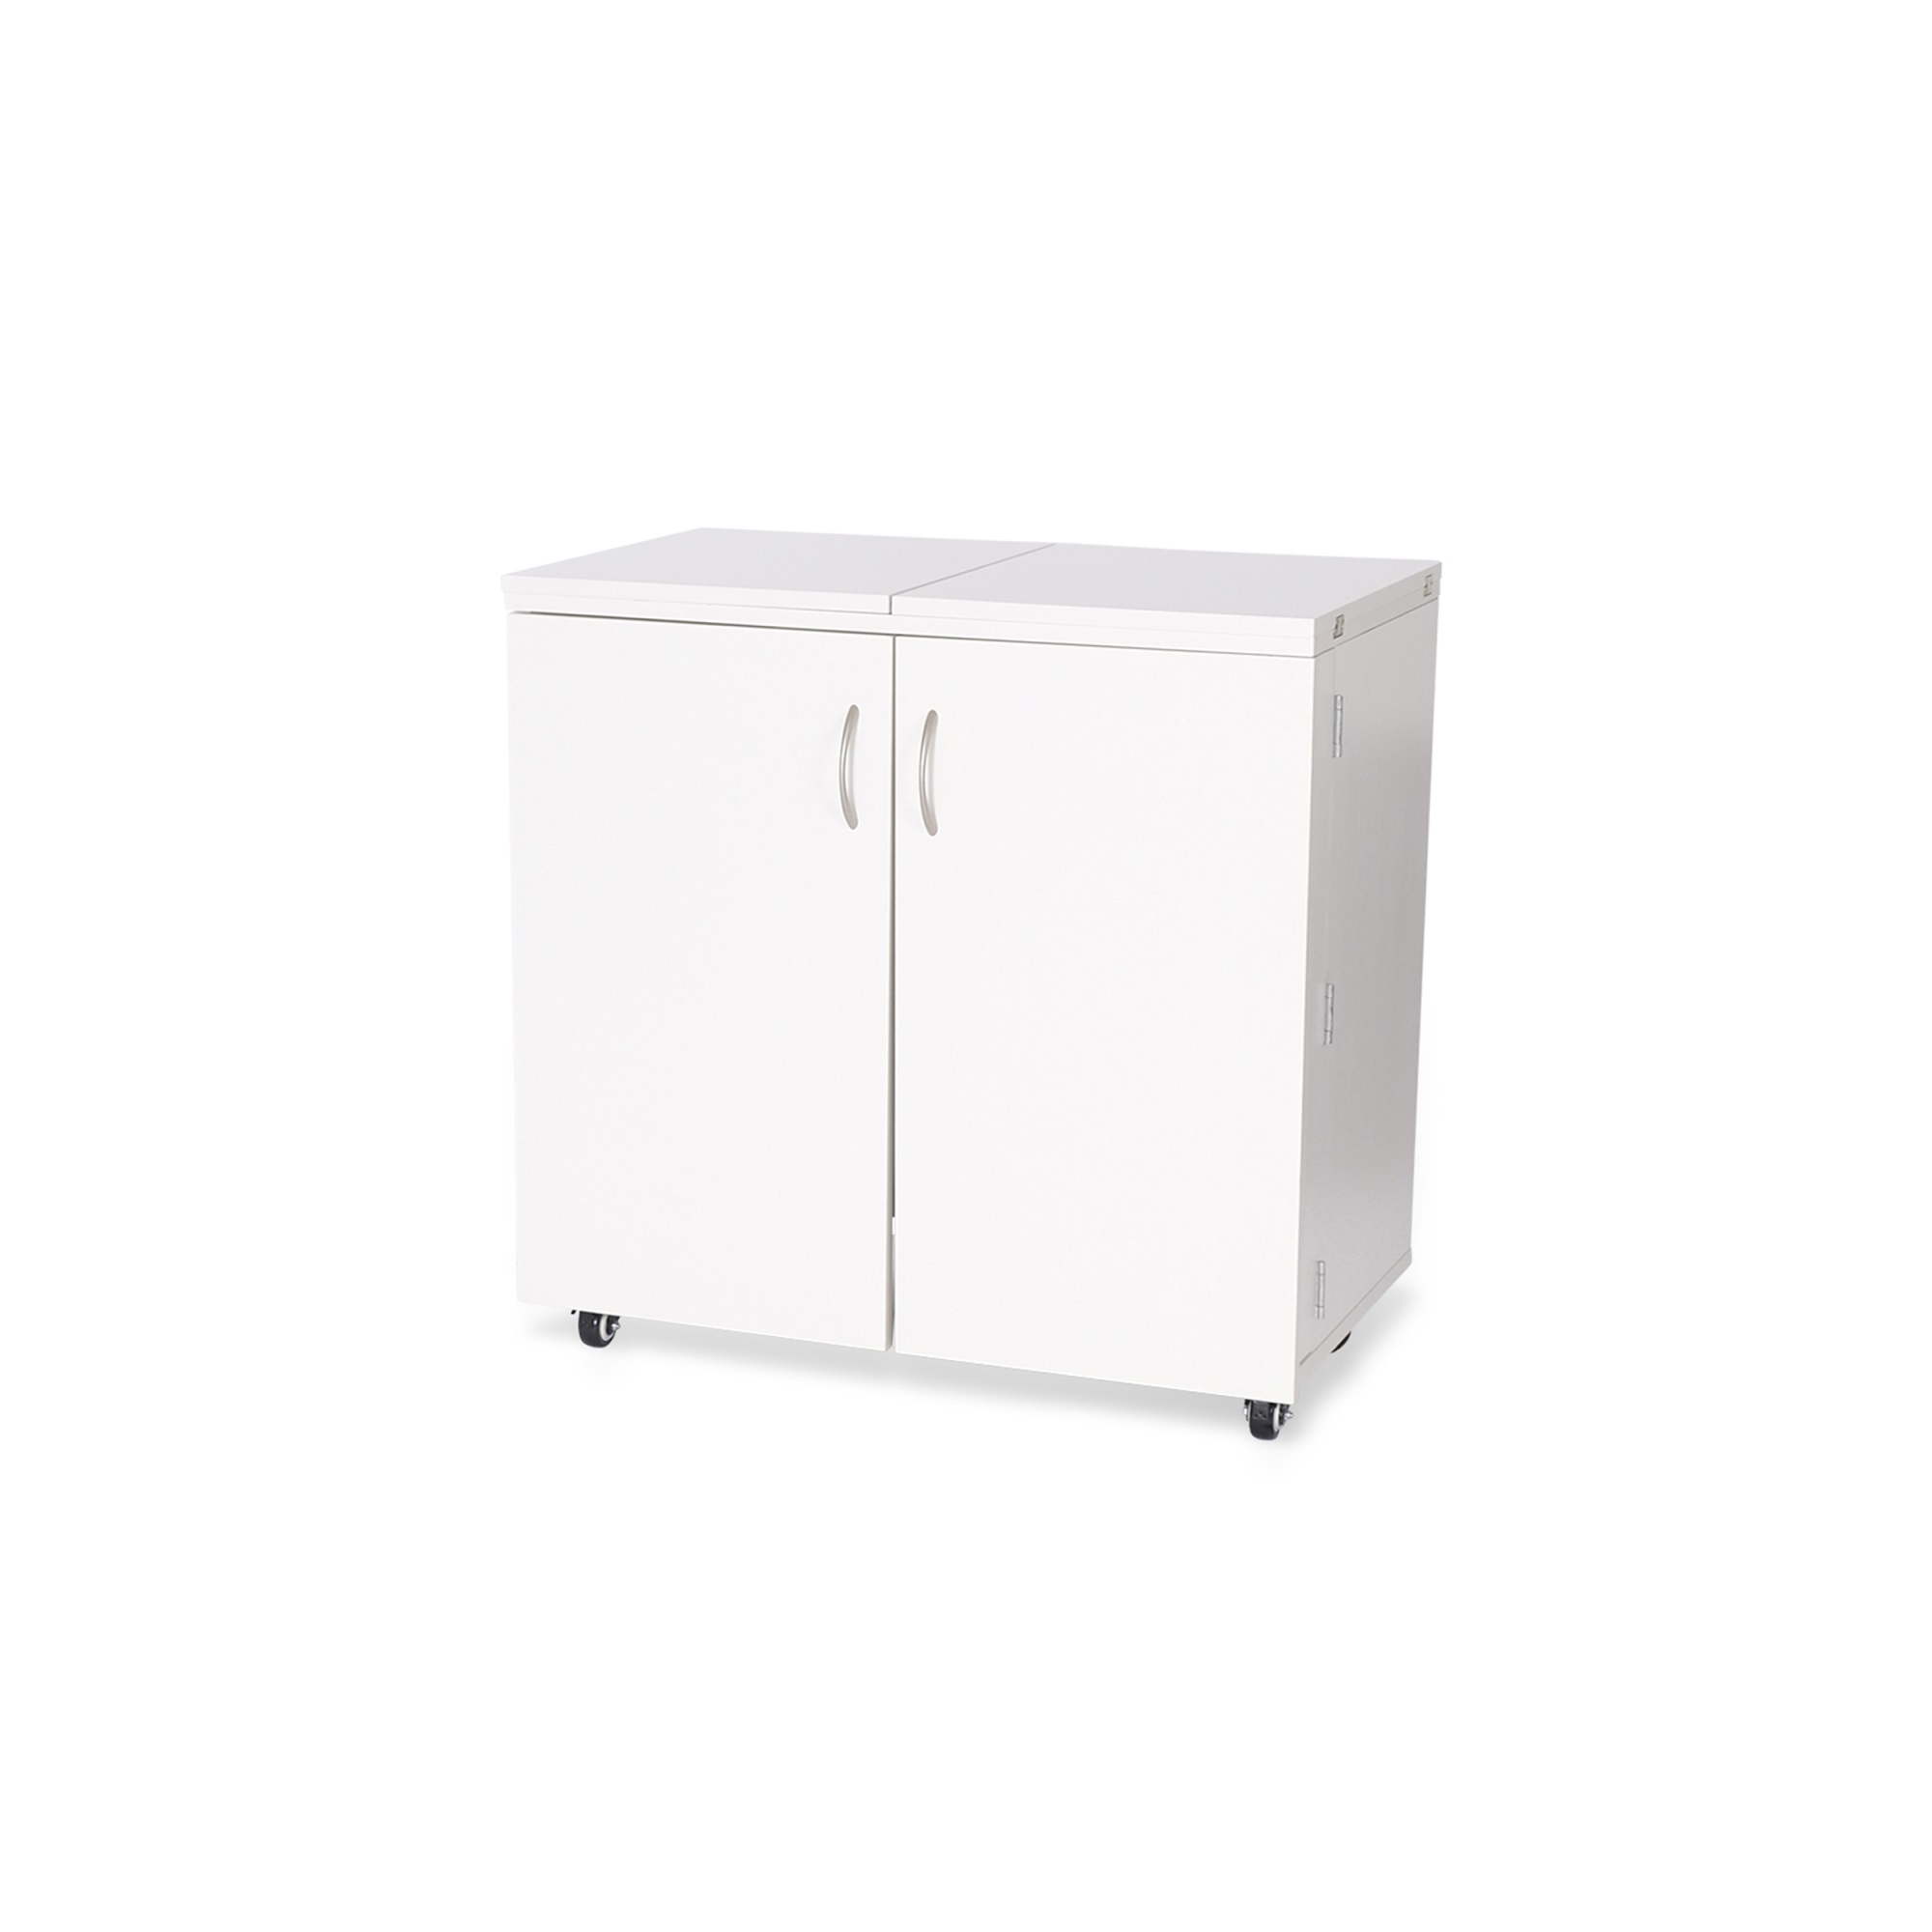 Arrow Bandicoot Sewing Cabinet Ash White